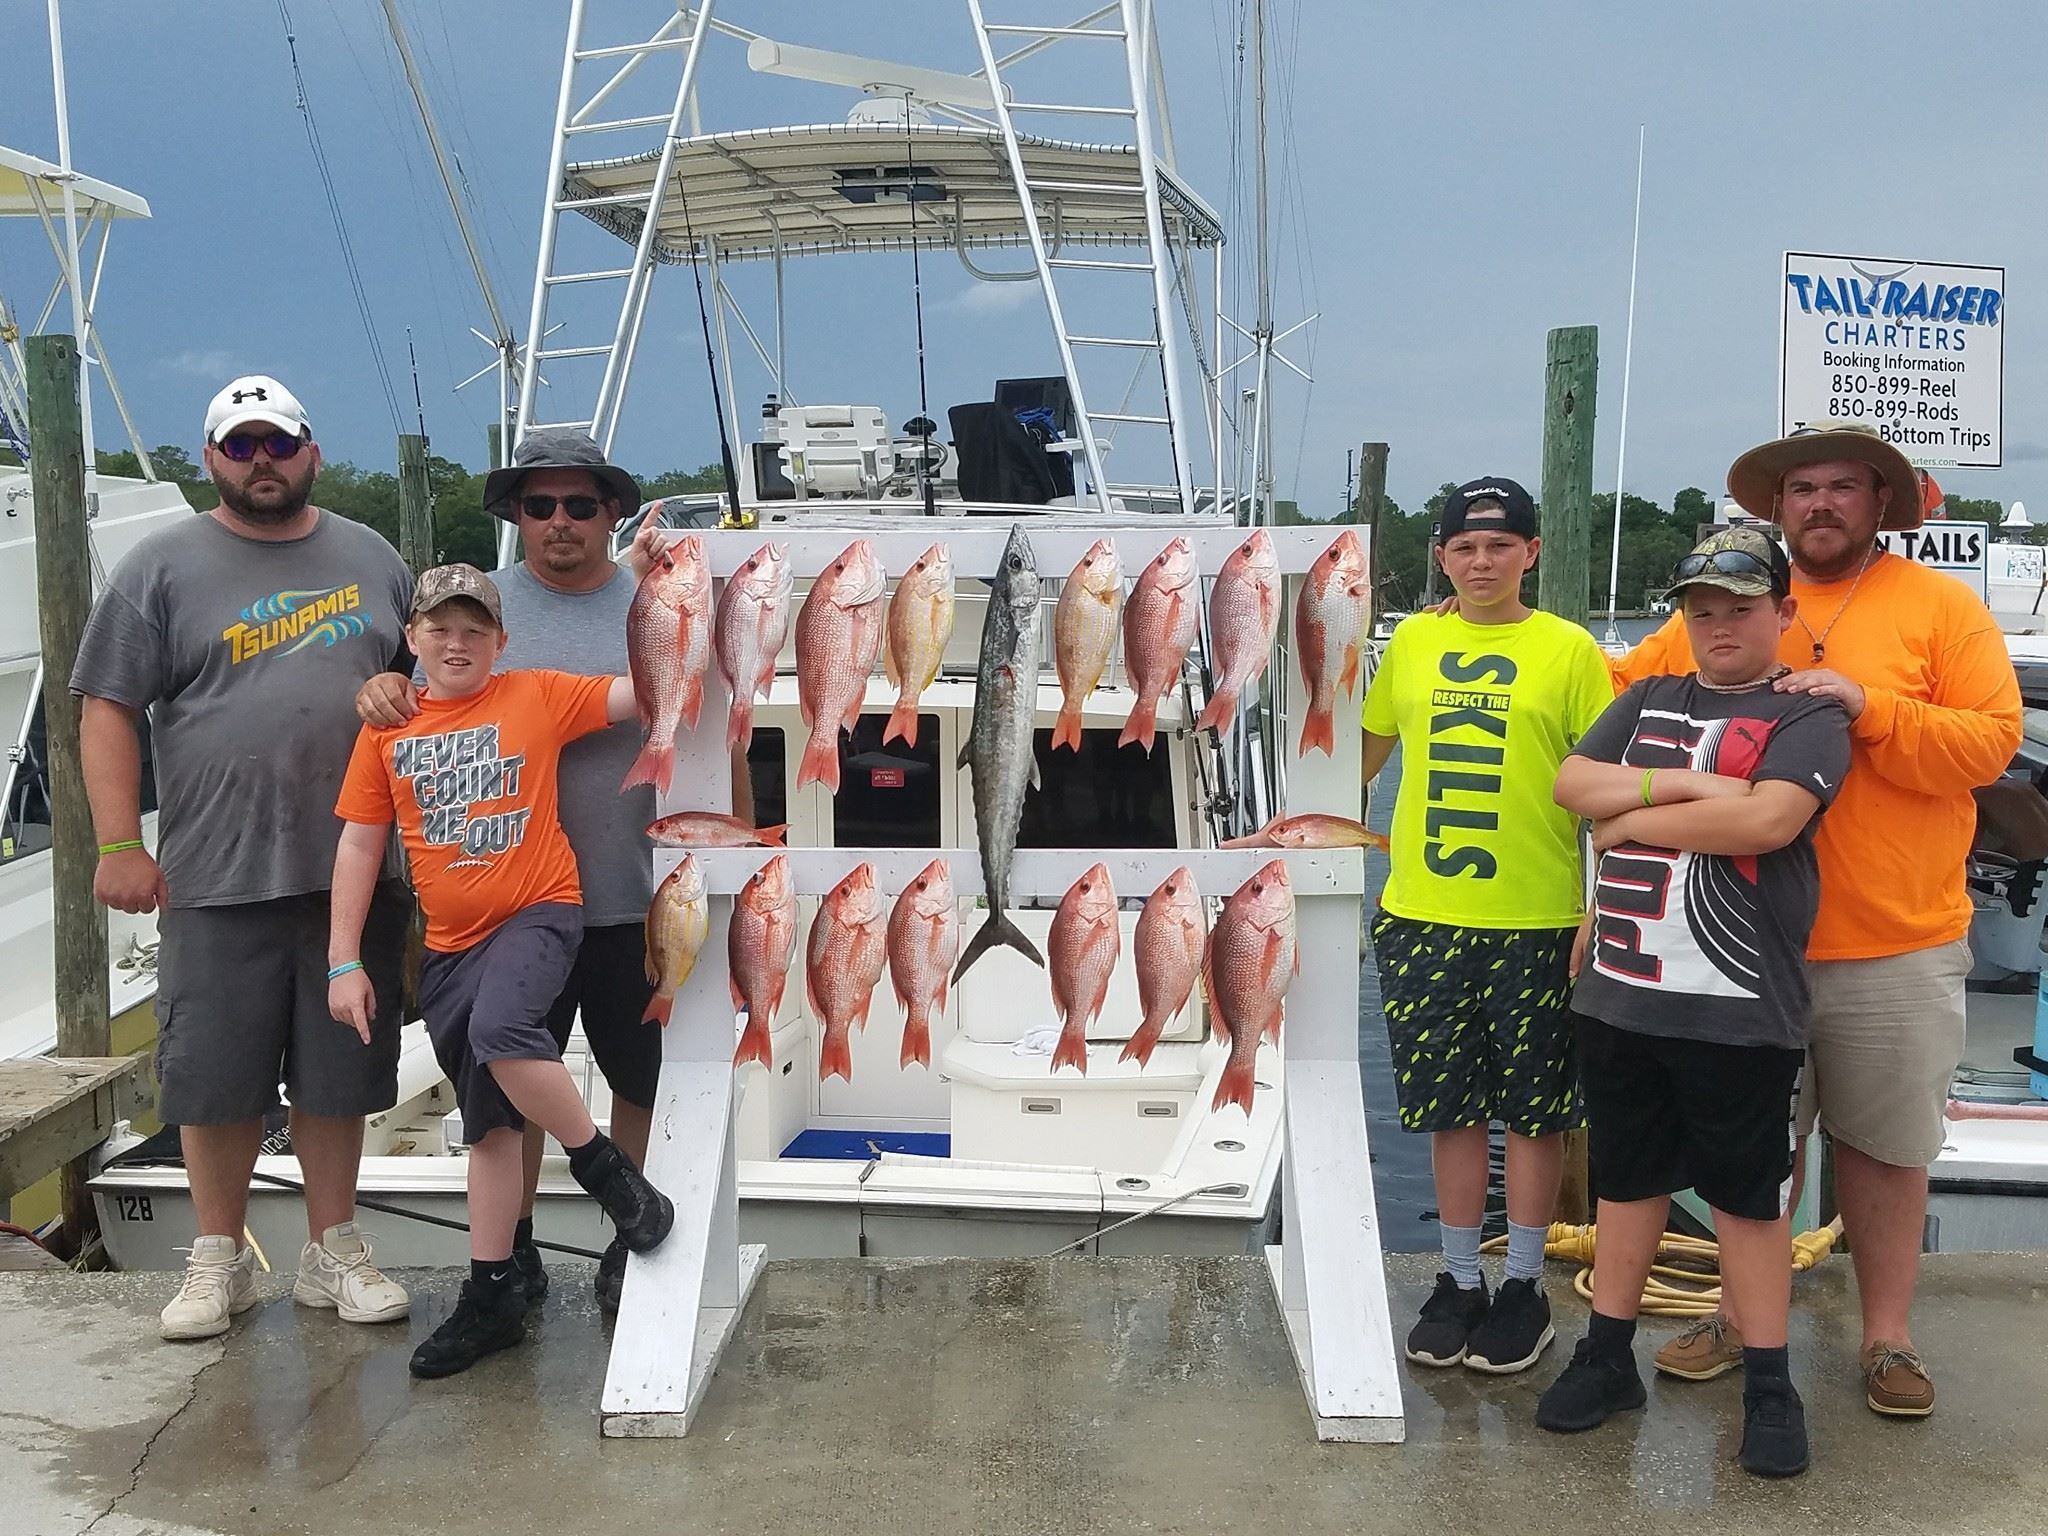 Tail Raiser Charters Florida Fishing Charters | Seasonal 6 or 8 Hour Private Charter Trip fishing Offshore